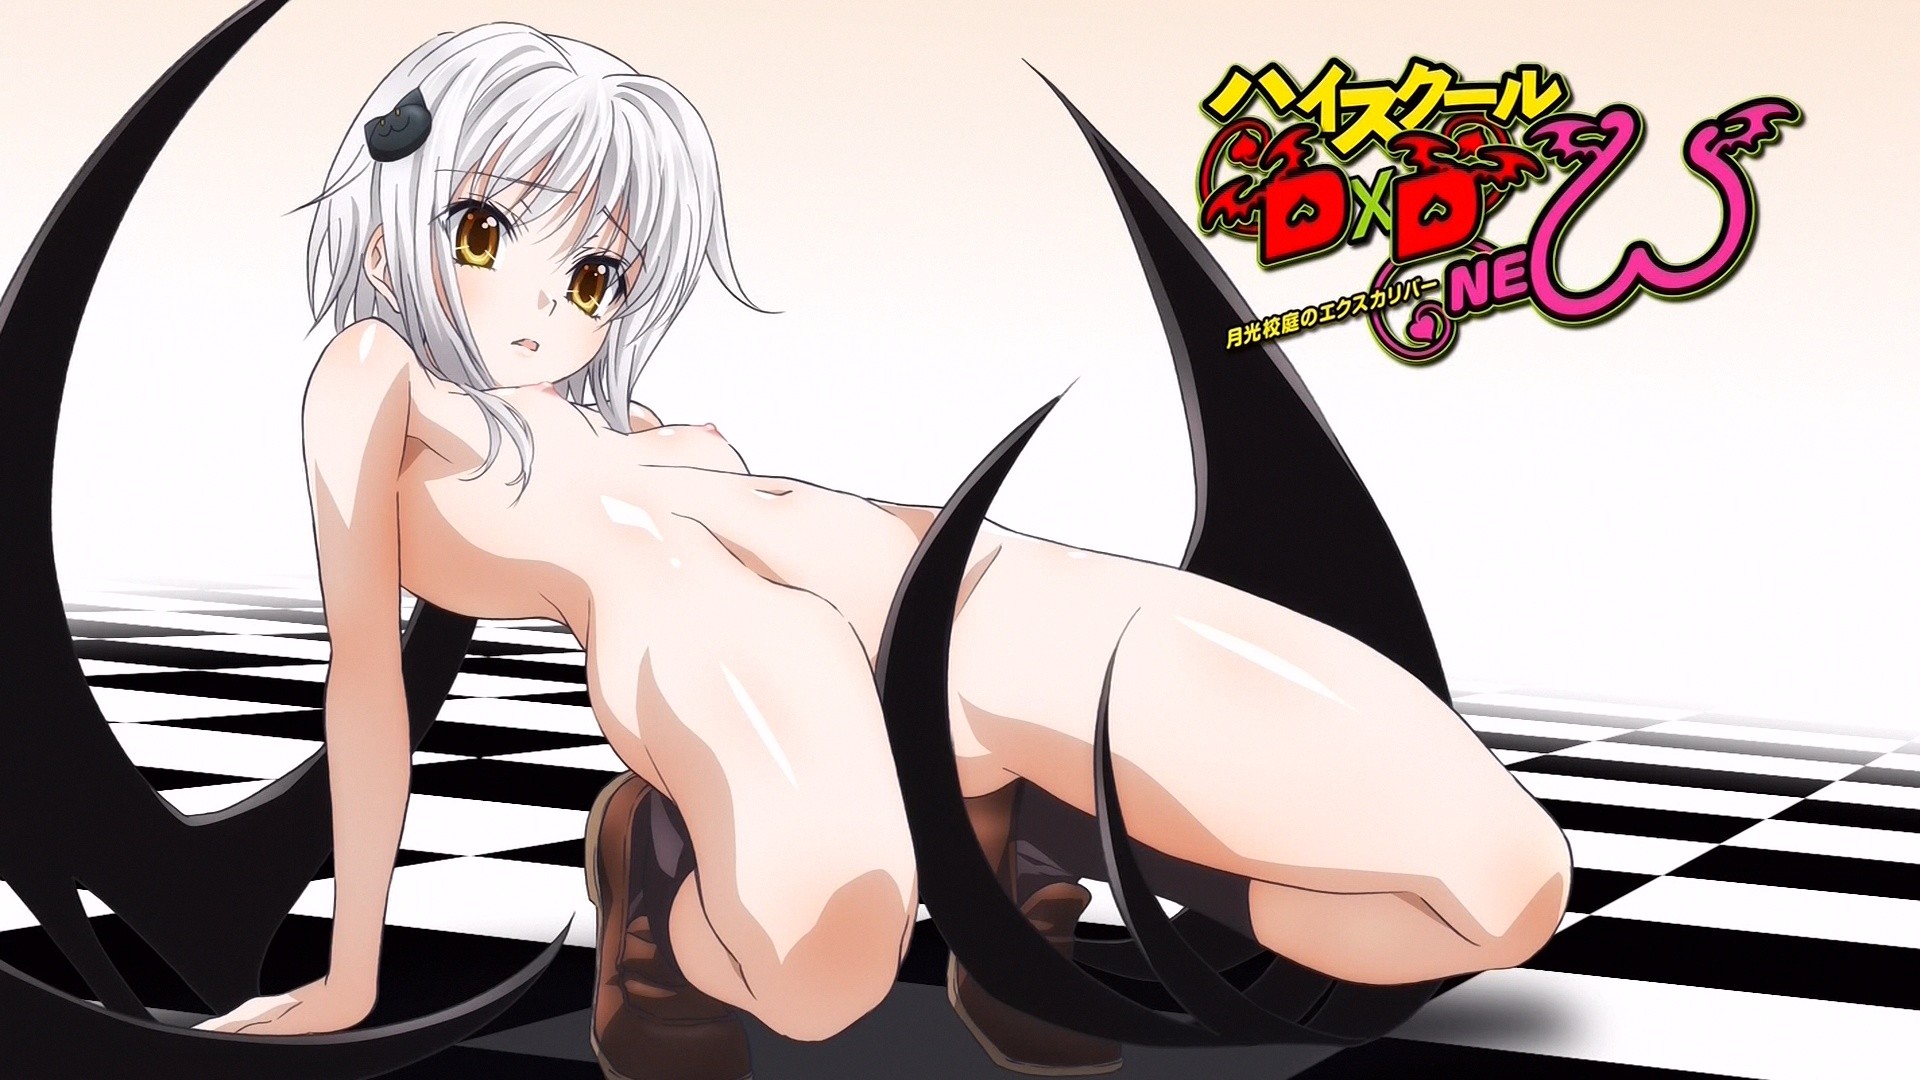 High School Dxd Nude Porn - Resized to 44% of original ...